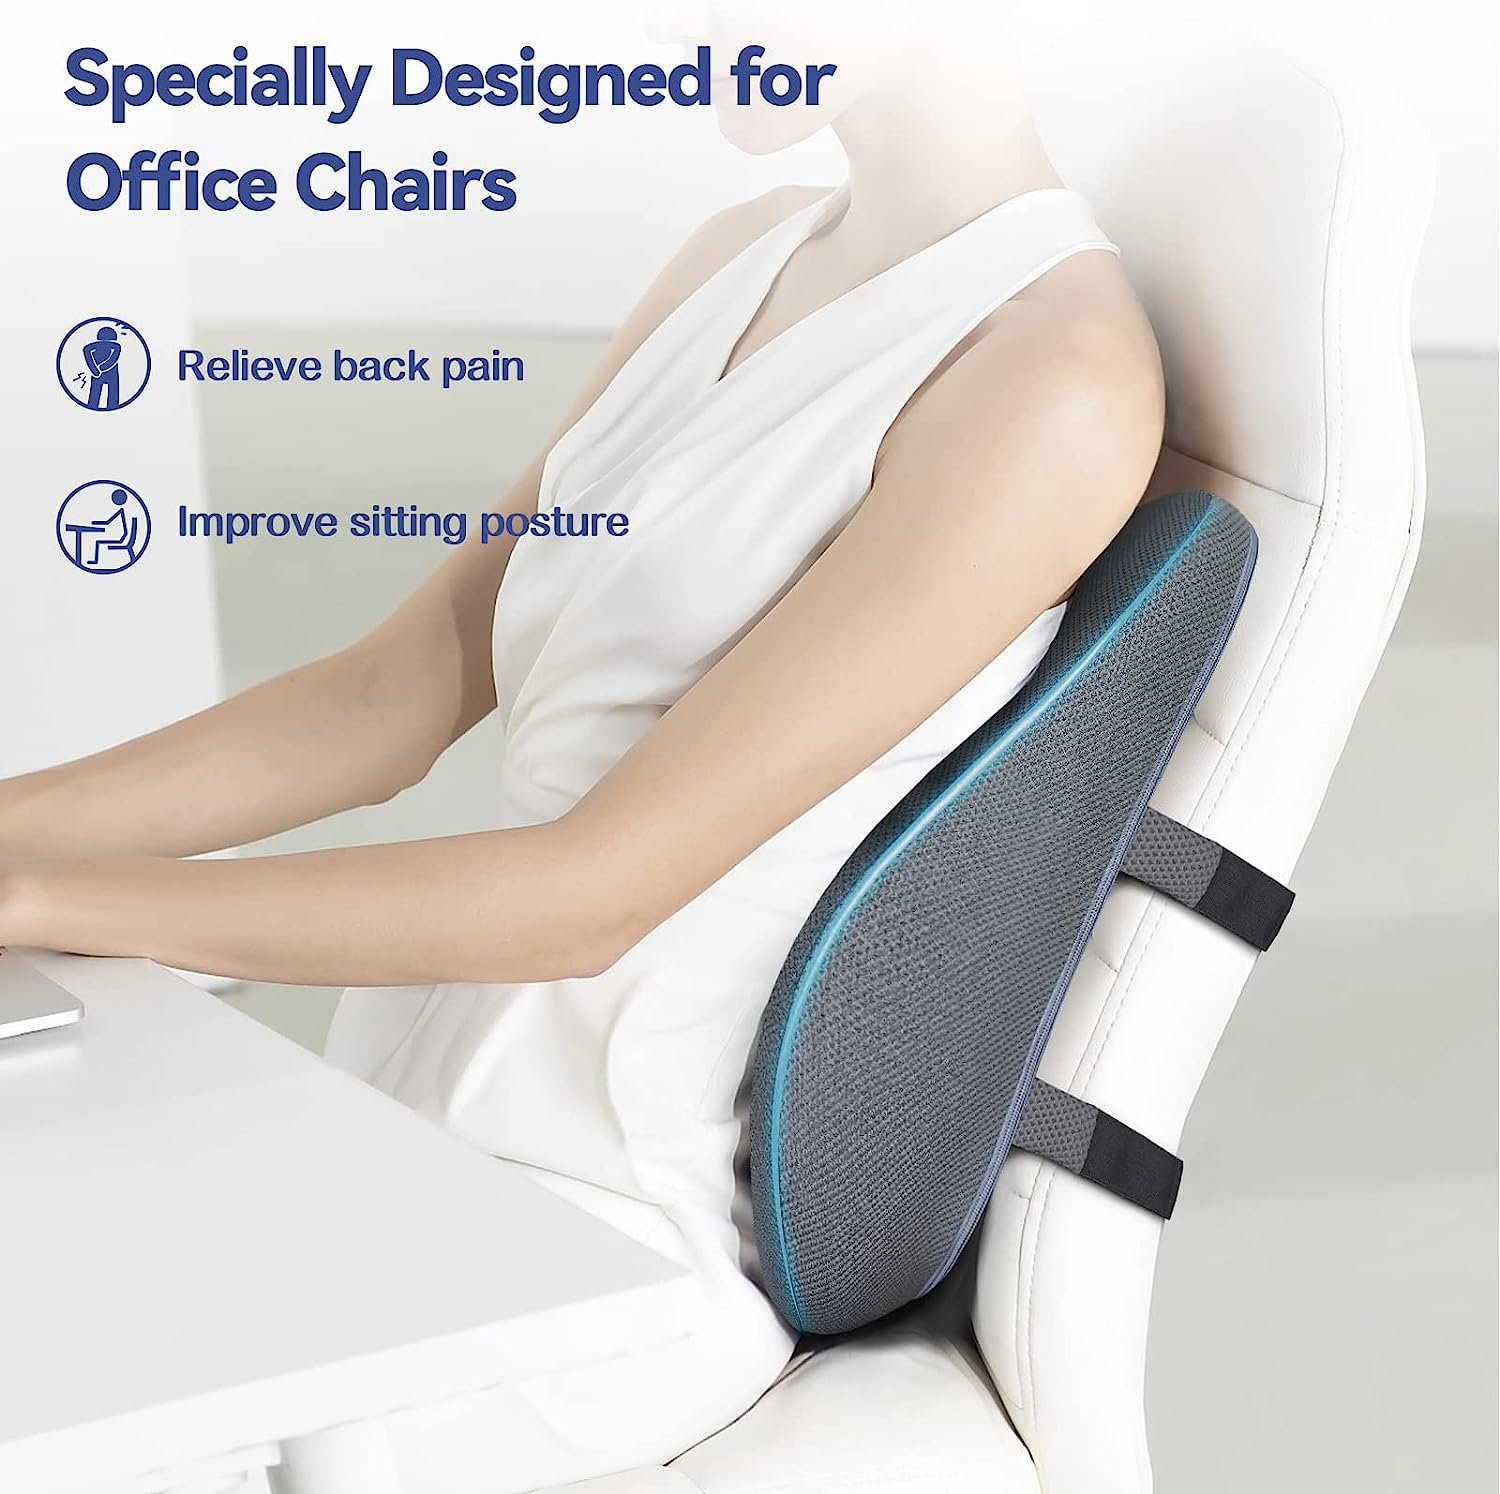 Lumbar Support Pillow for Bed: Memory Foam Bamboo Charcoal Cushion for  Lower Waist Pain or Back Pain Relief - Back Support Sleeping Pillow for  Sofa